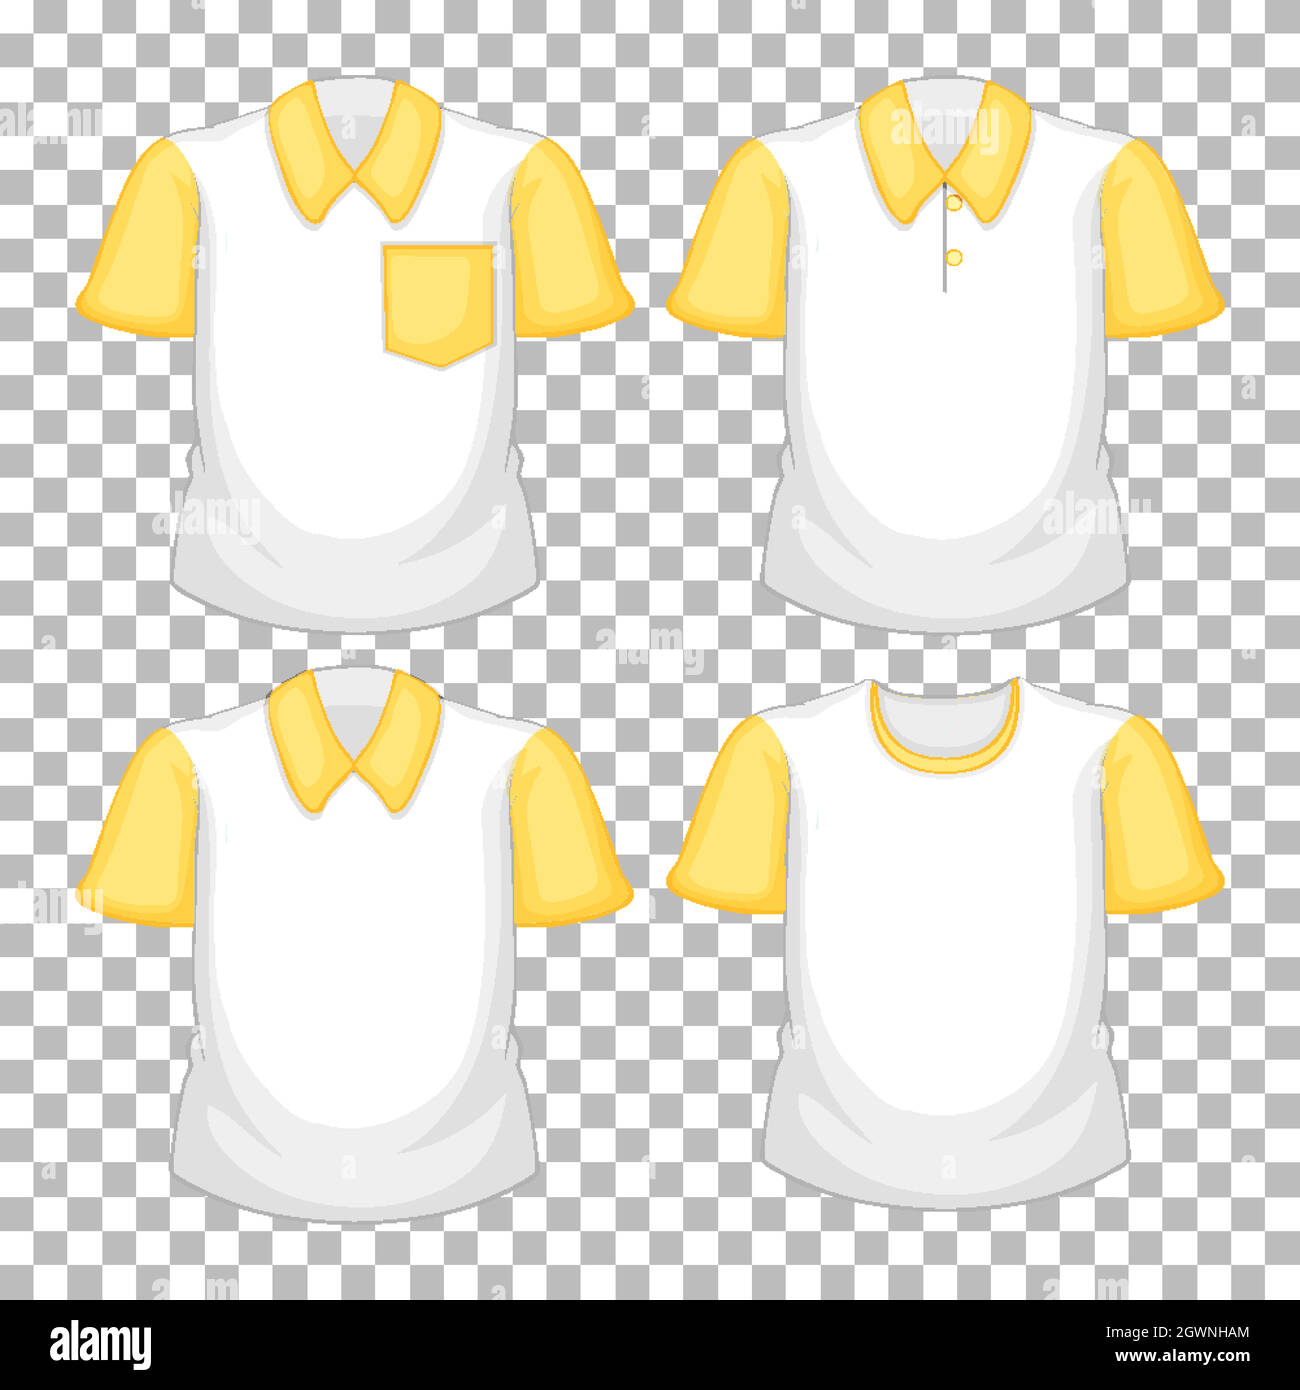 Set of different shirts with yellow sleeves isolated on transparent background Stock Vector